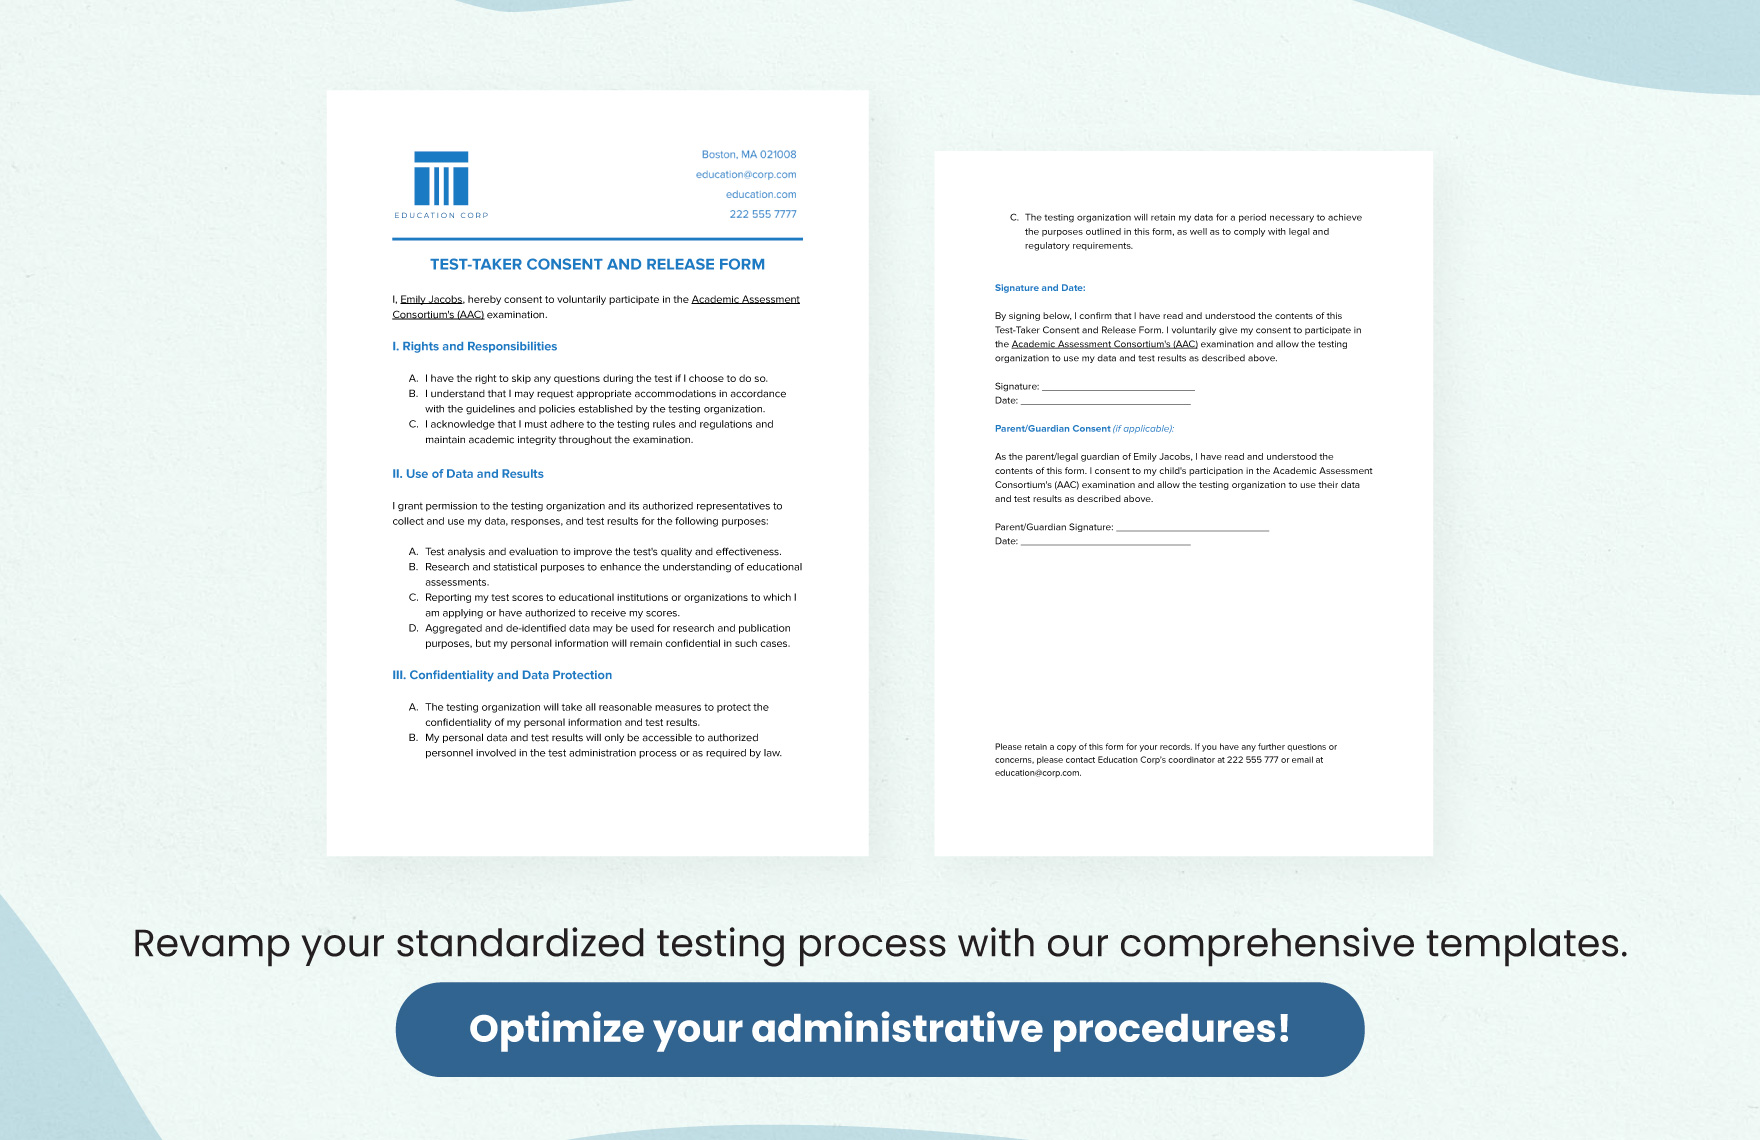 Test-Taker Consent and Release Form Template